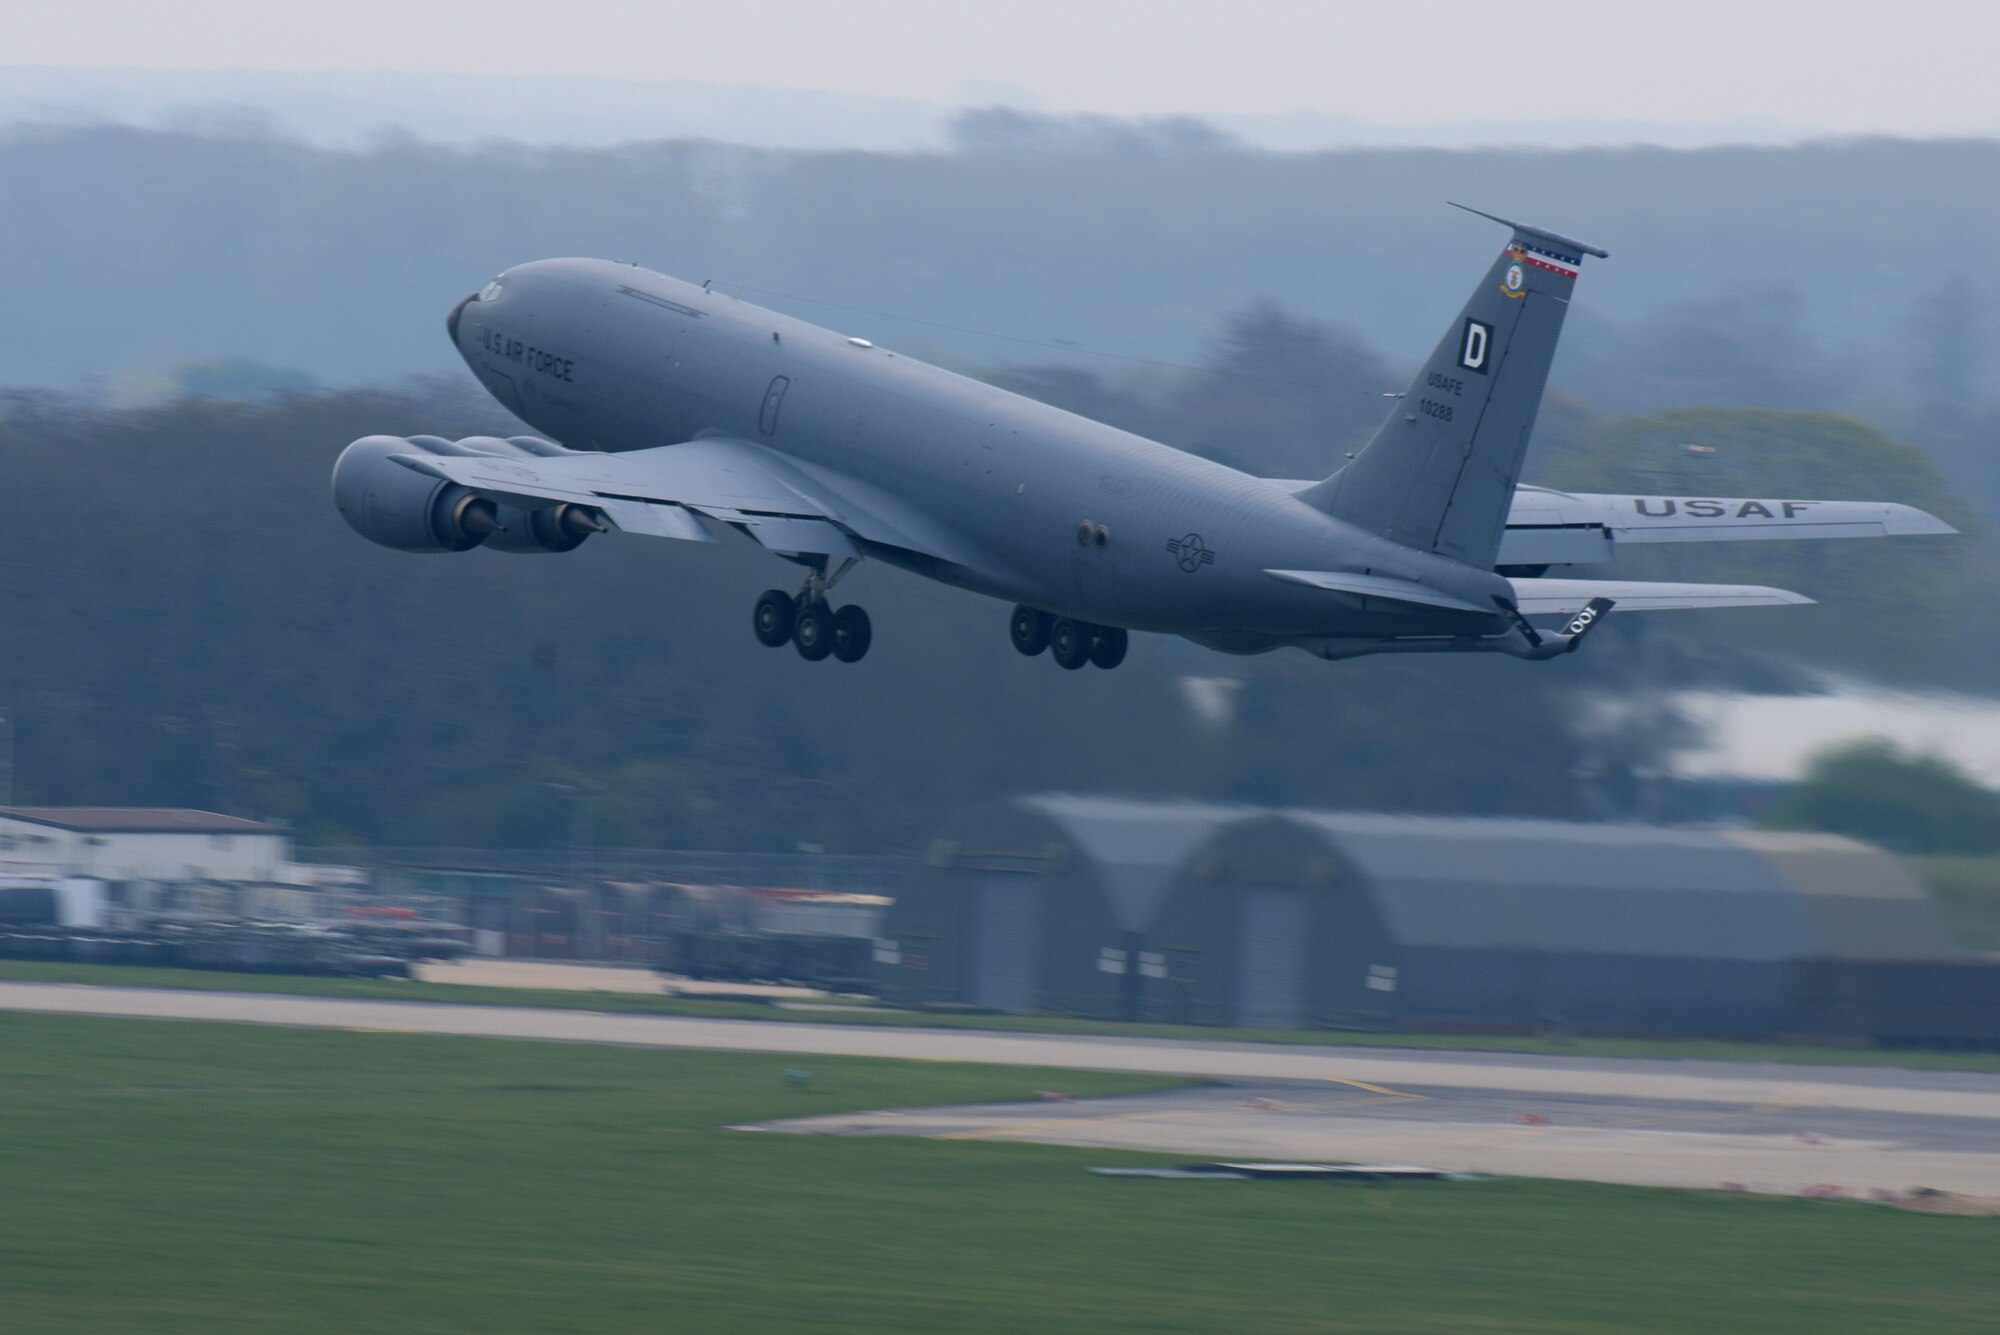 A U.S. Air Force KC-135 Stratotanker from the 100th Air Refueling Wing takes off at RAF Mildenhall, England, April 16, 2019. The Statotanker is one of the oldest models of aircraft still in use by the Air Force. (U.S. Air Force photo by Senior Airman Benjamin Cooper